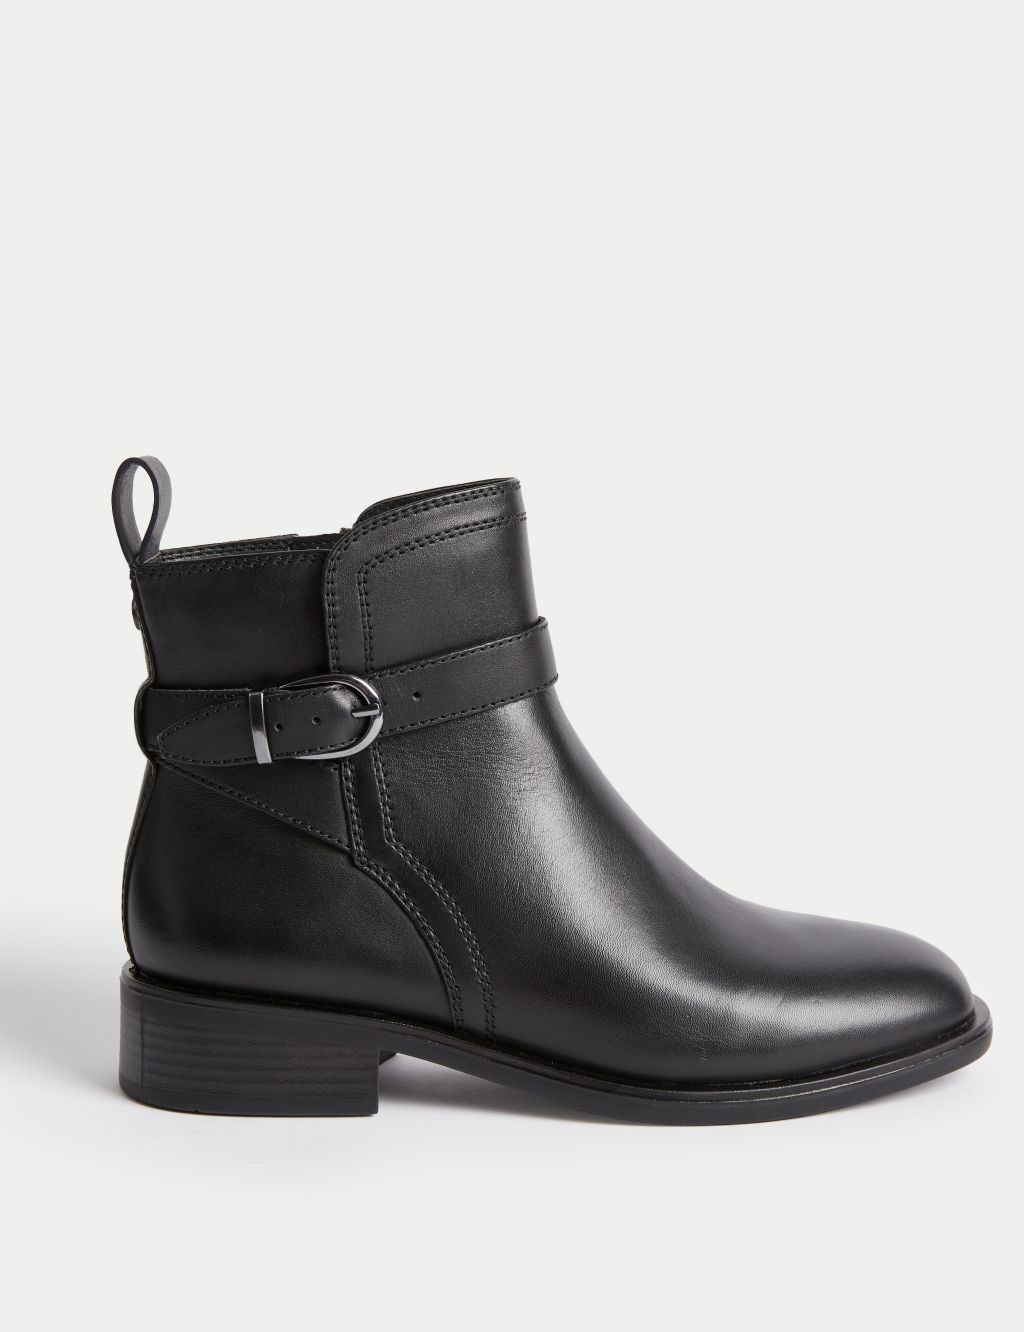 Leather Buckle Flatform Ankle Boots